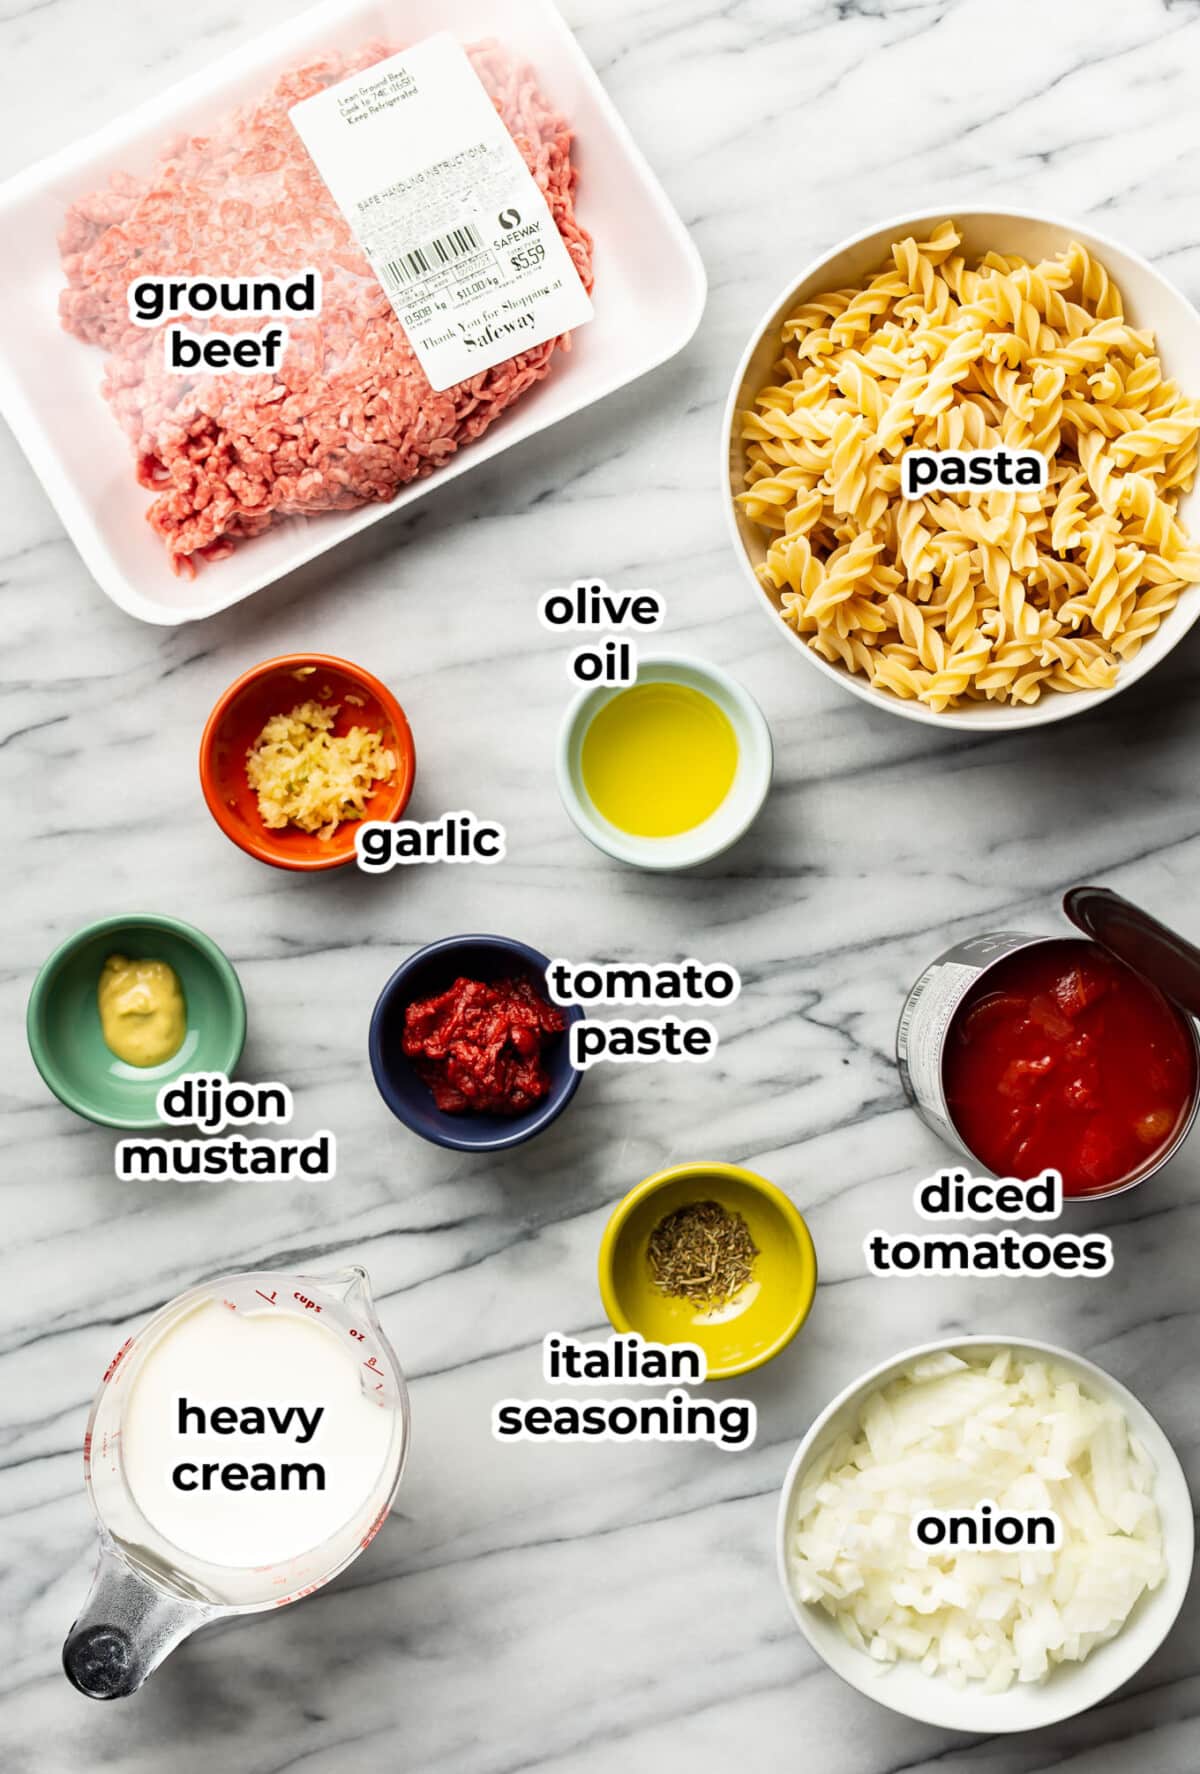 ingredients for ground beef pasta in prep bowls